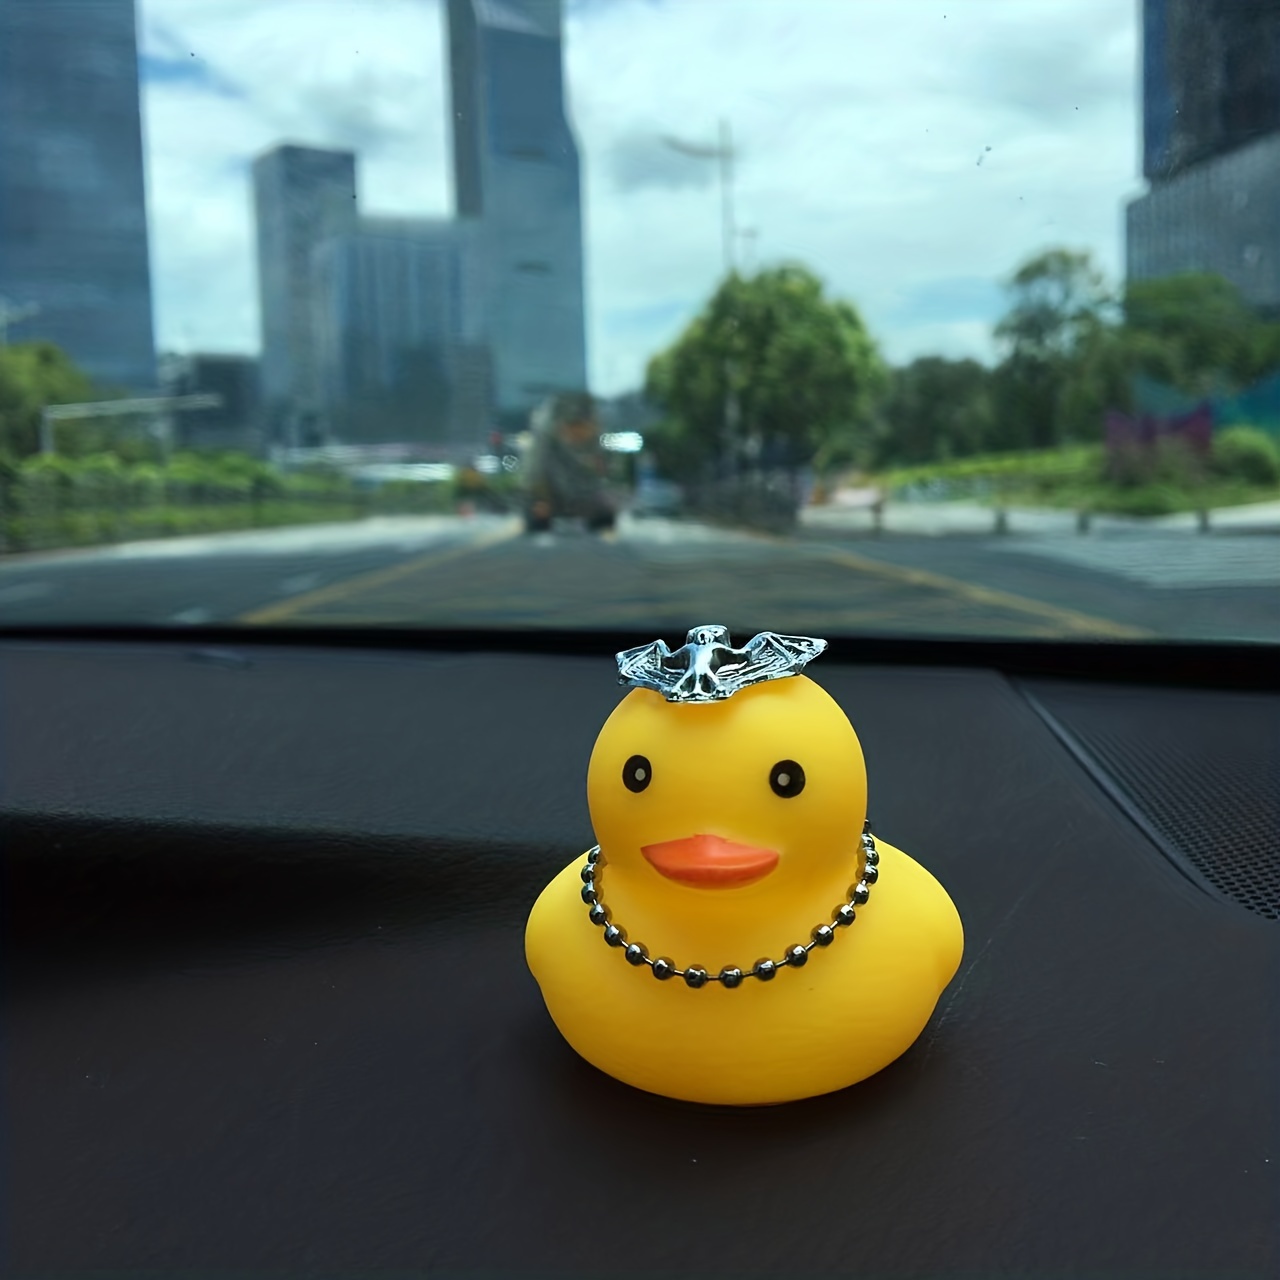 Ducks for Cars - Rubber Duck for Dashboard of Car, Yellow Duck Car  Dashboard Decorations, Squeak Ducks Car Ornaments Car Décor Accessories  with Hat